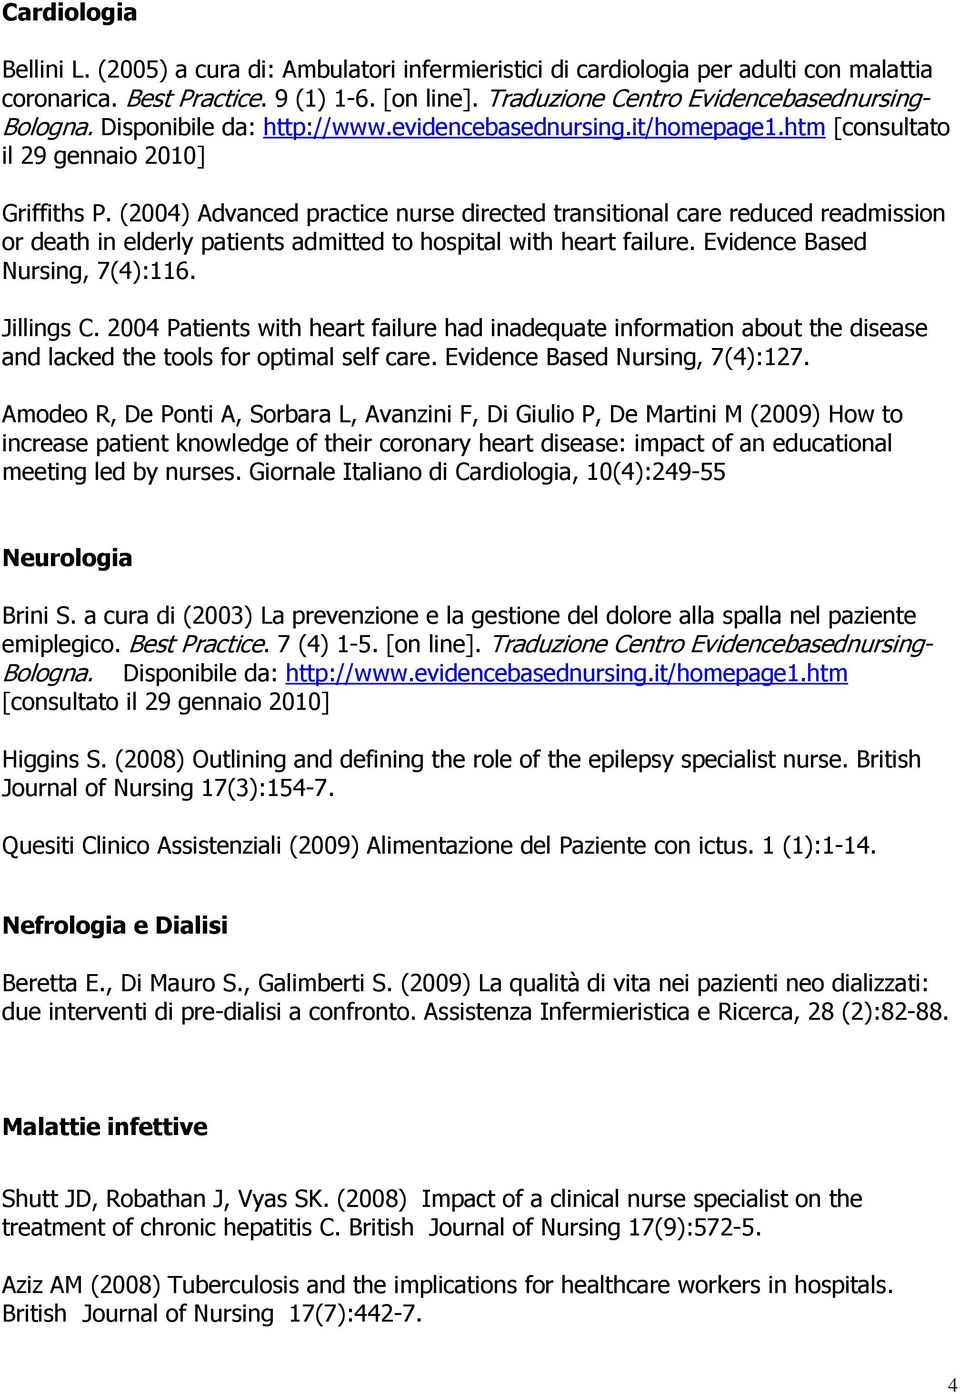 (2004) Advanced practice nurse directed transitional care reduced readmission or death in elderly patients admitted to hospital with heart failure. Evidence Based Nursing, 7(4):116. Jillings C.